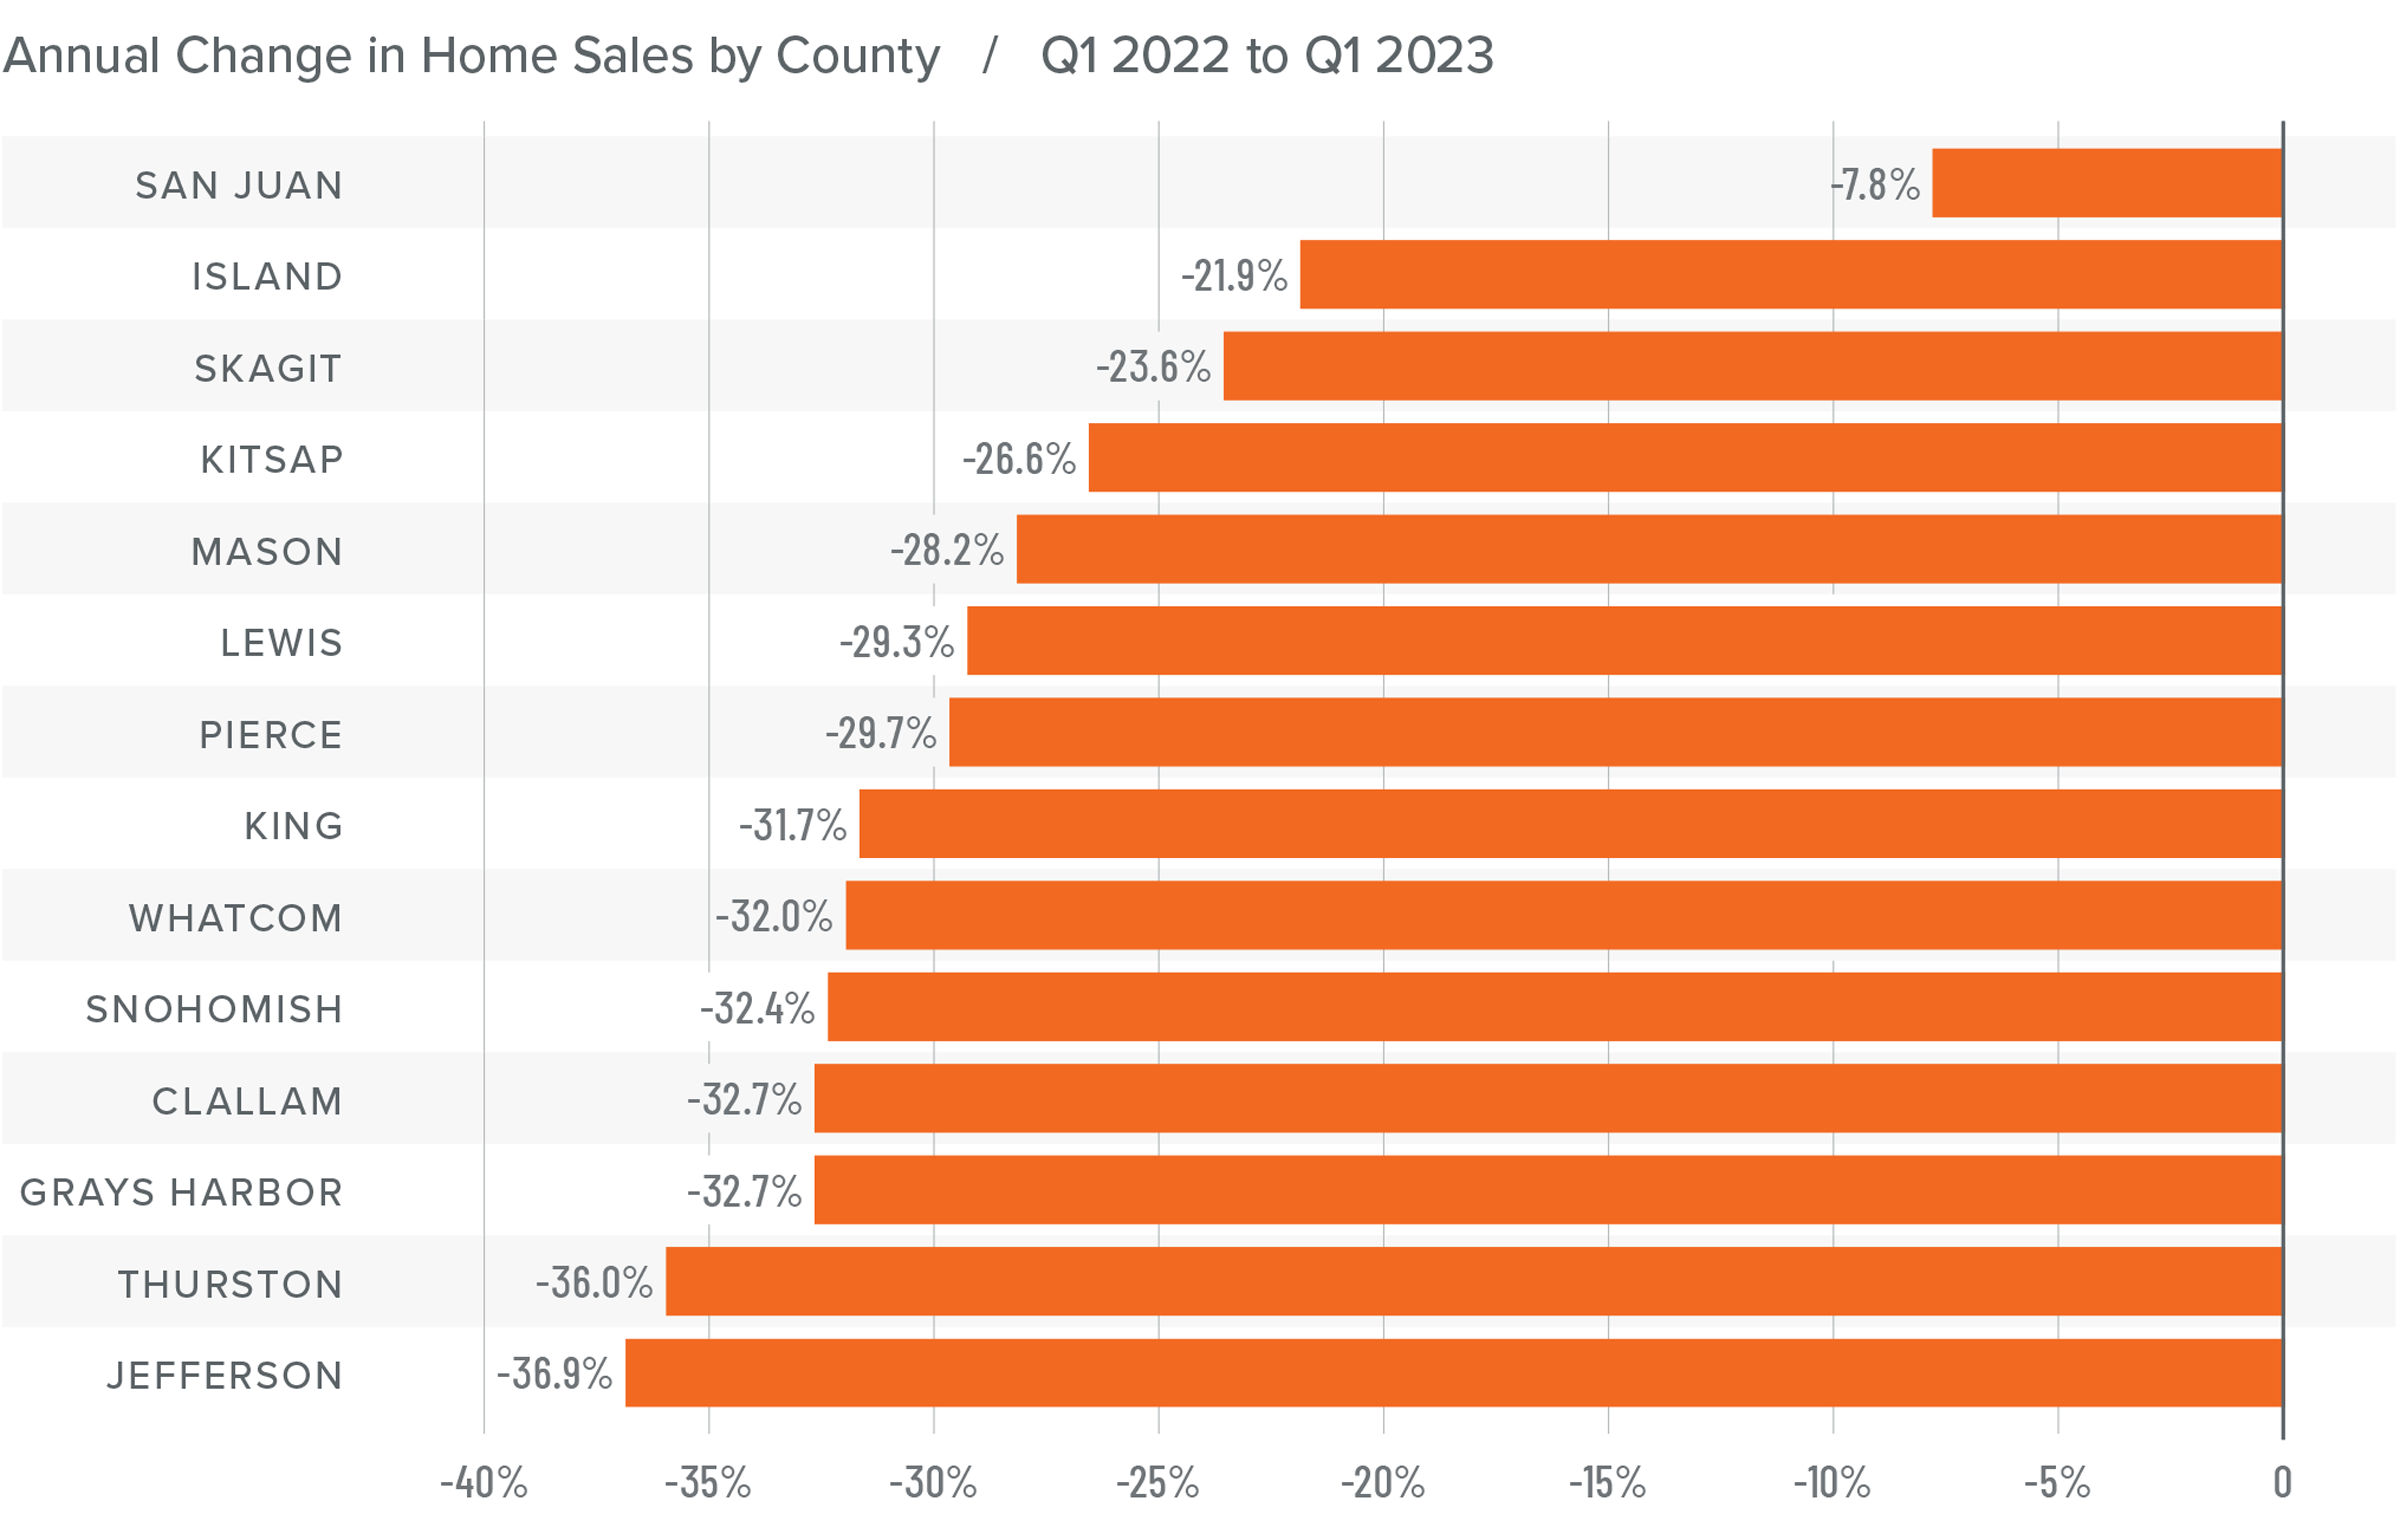 A bar graph showing the annual change in home sales for various counties in Western Washington from Q1 2022 to Q1 2023. All counties have a negative percentage year-over-year change. Here are the totals: San Juan at -7.8%, Island at -21.9%, Skagit -23.6%, Kitsap -26.6%, Mason -28.2%, Lewis -29.3%, Pierce -29.7%, King -31.7%, Whatcom -32%, Snohomish -32.4%, Clallam and Grays Harbor -32.7%, Thurston -36%, and Jefferson -36.9%.